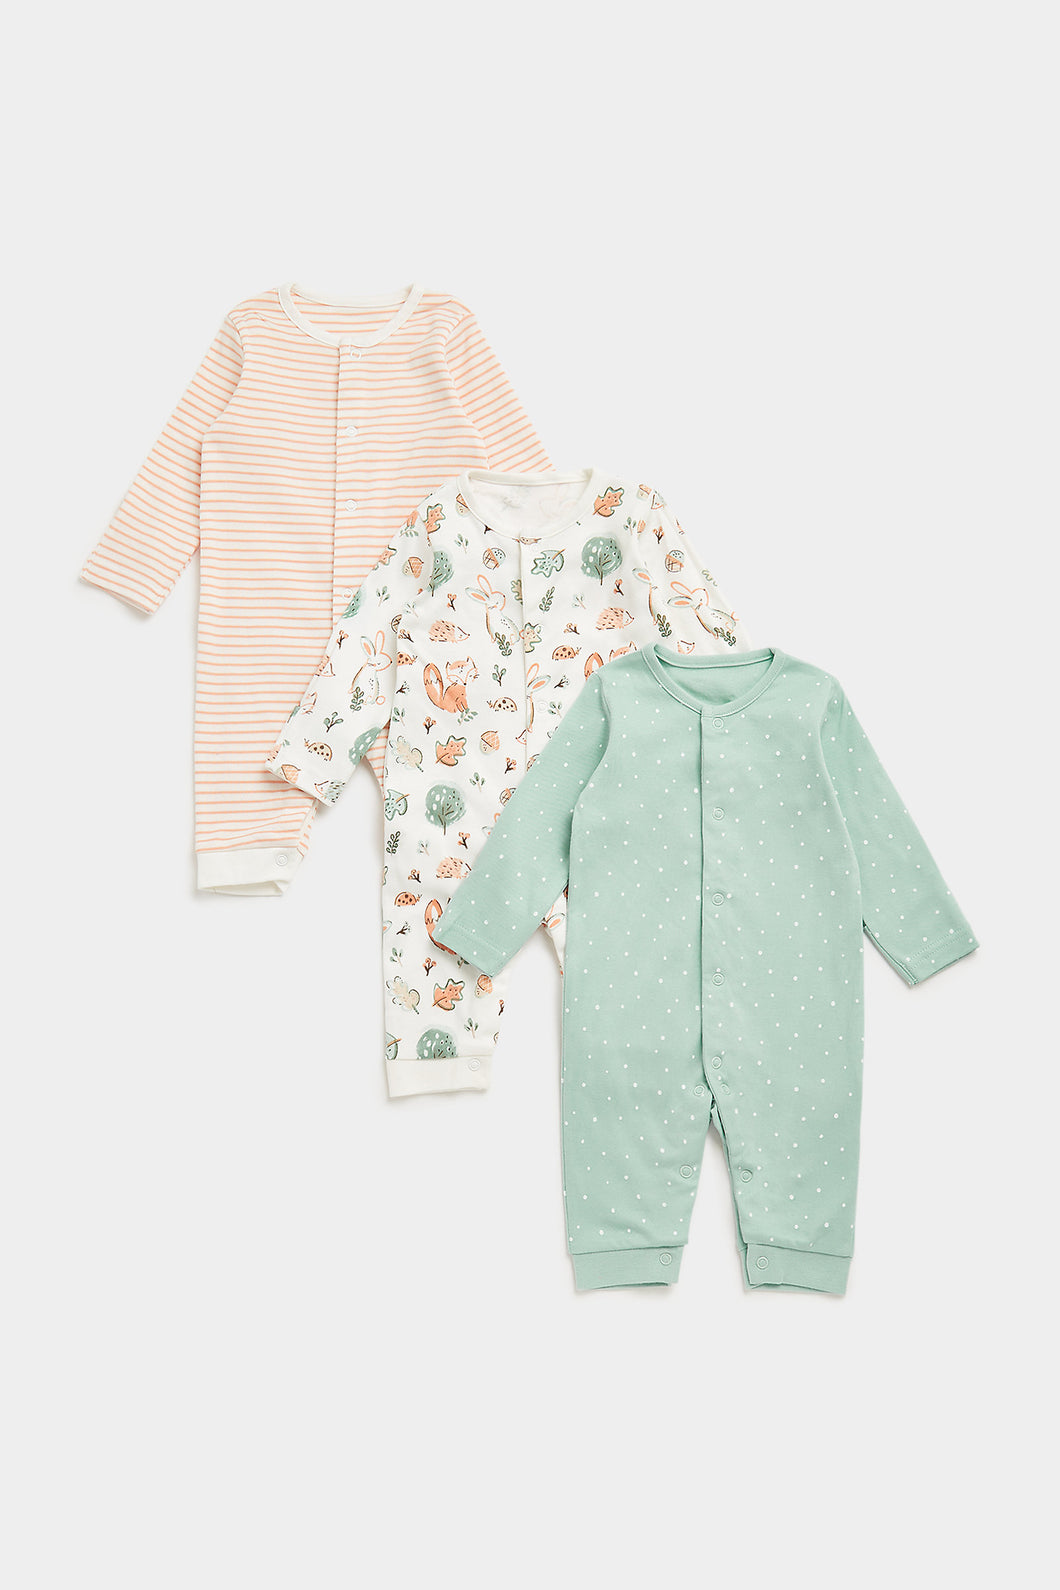 Mothercare Woodland Footless Baby Sleepsuits